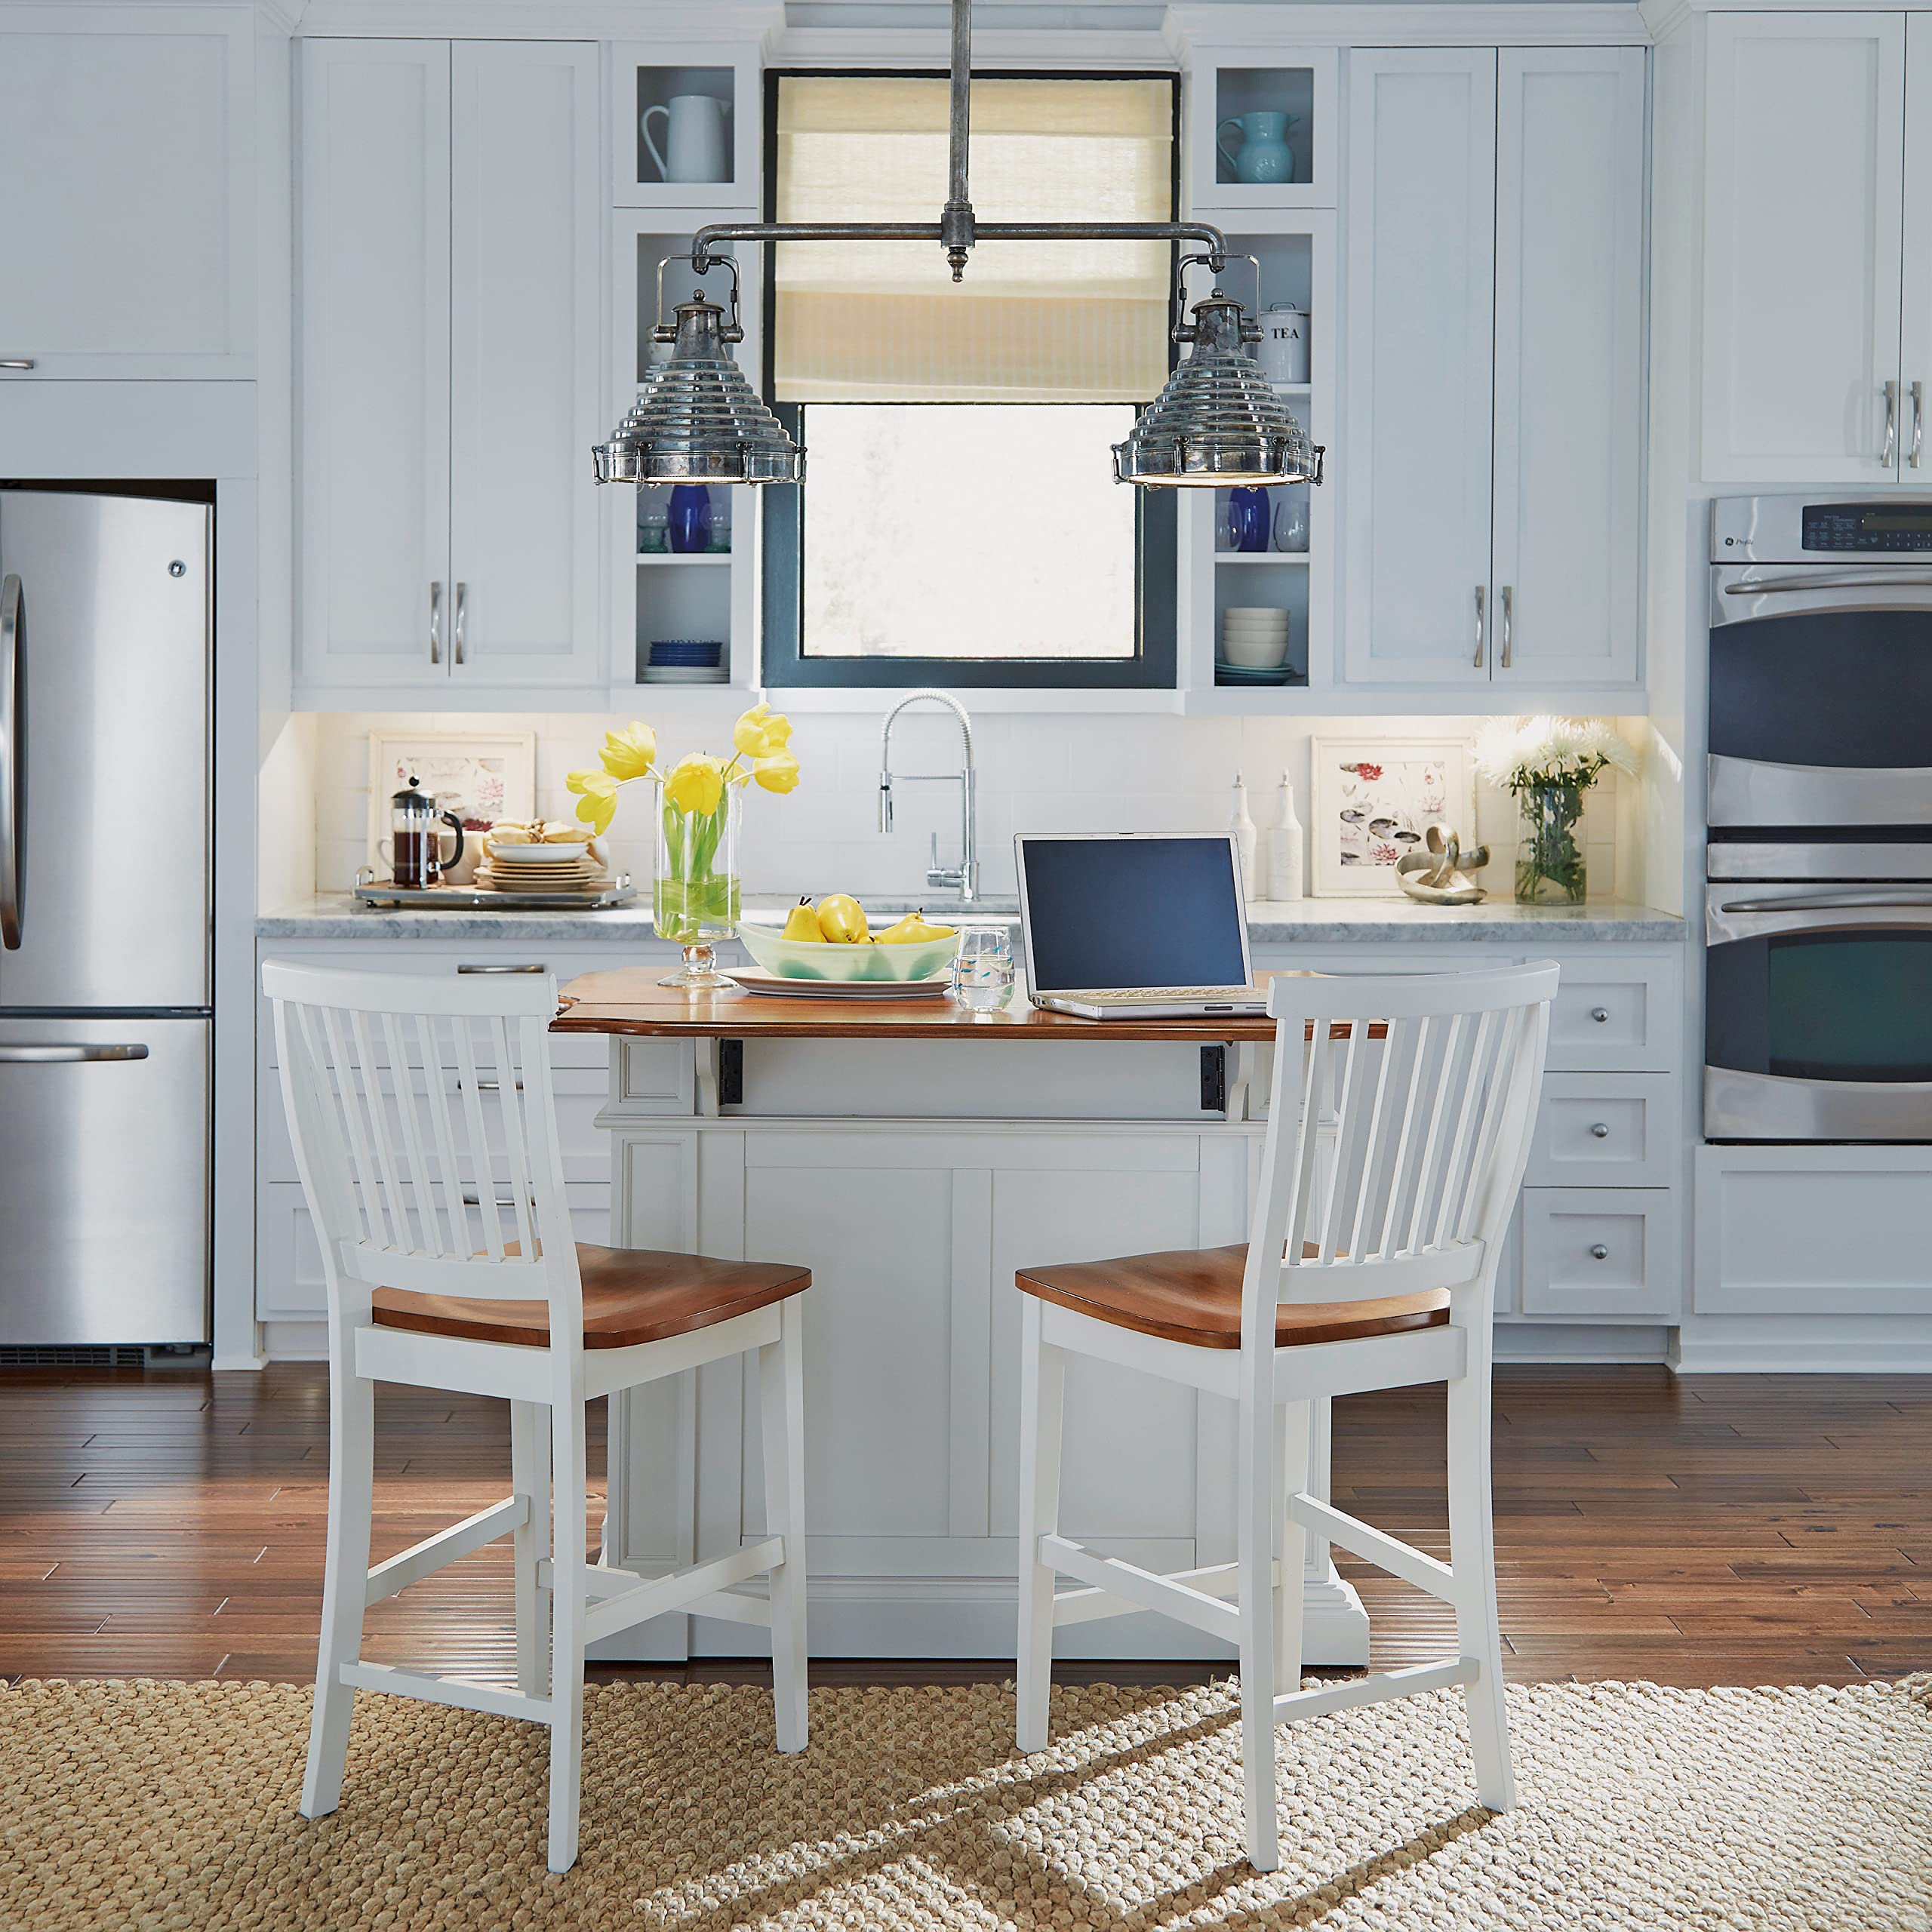 Americana White and Distressed Oak Kitchen Island and Stools by Home Styles